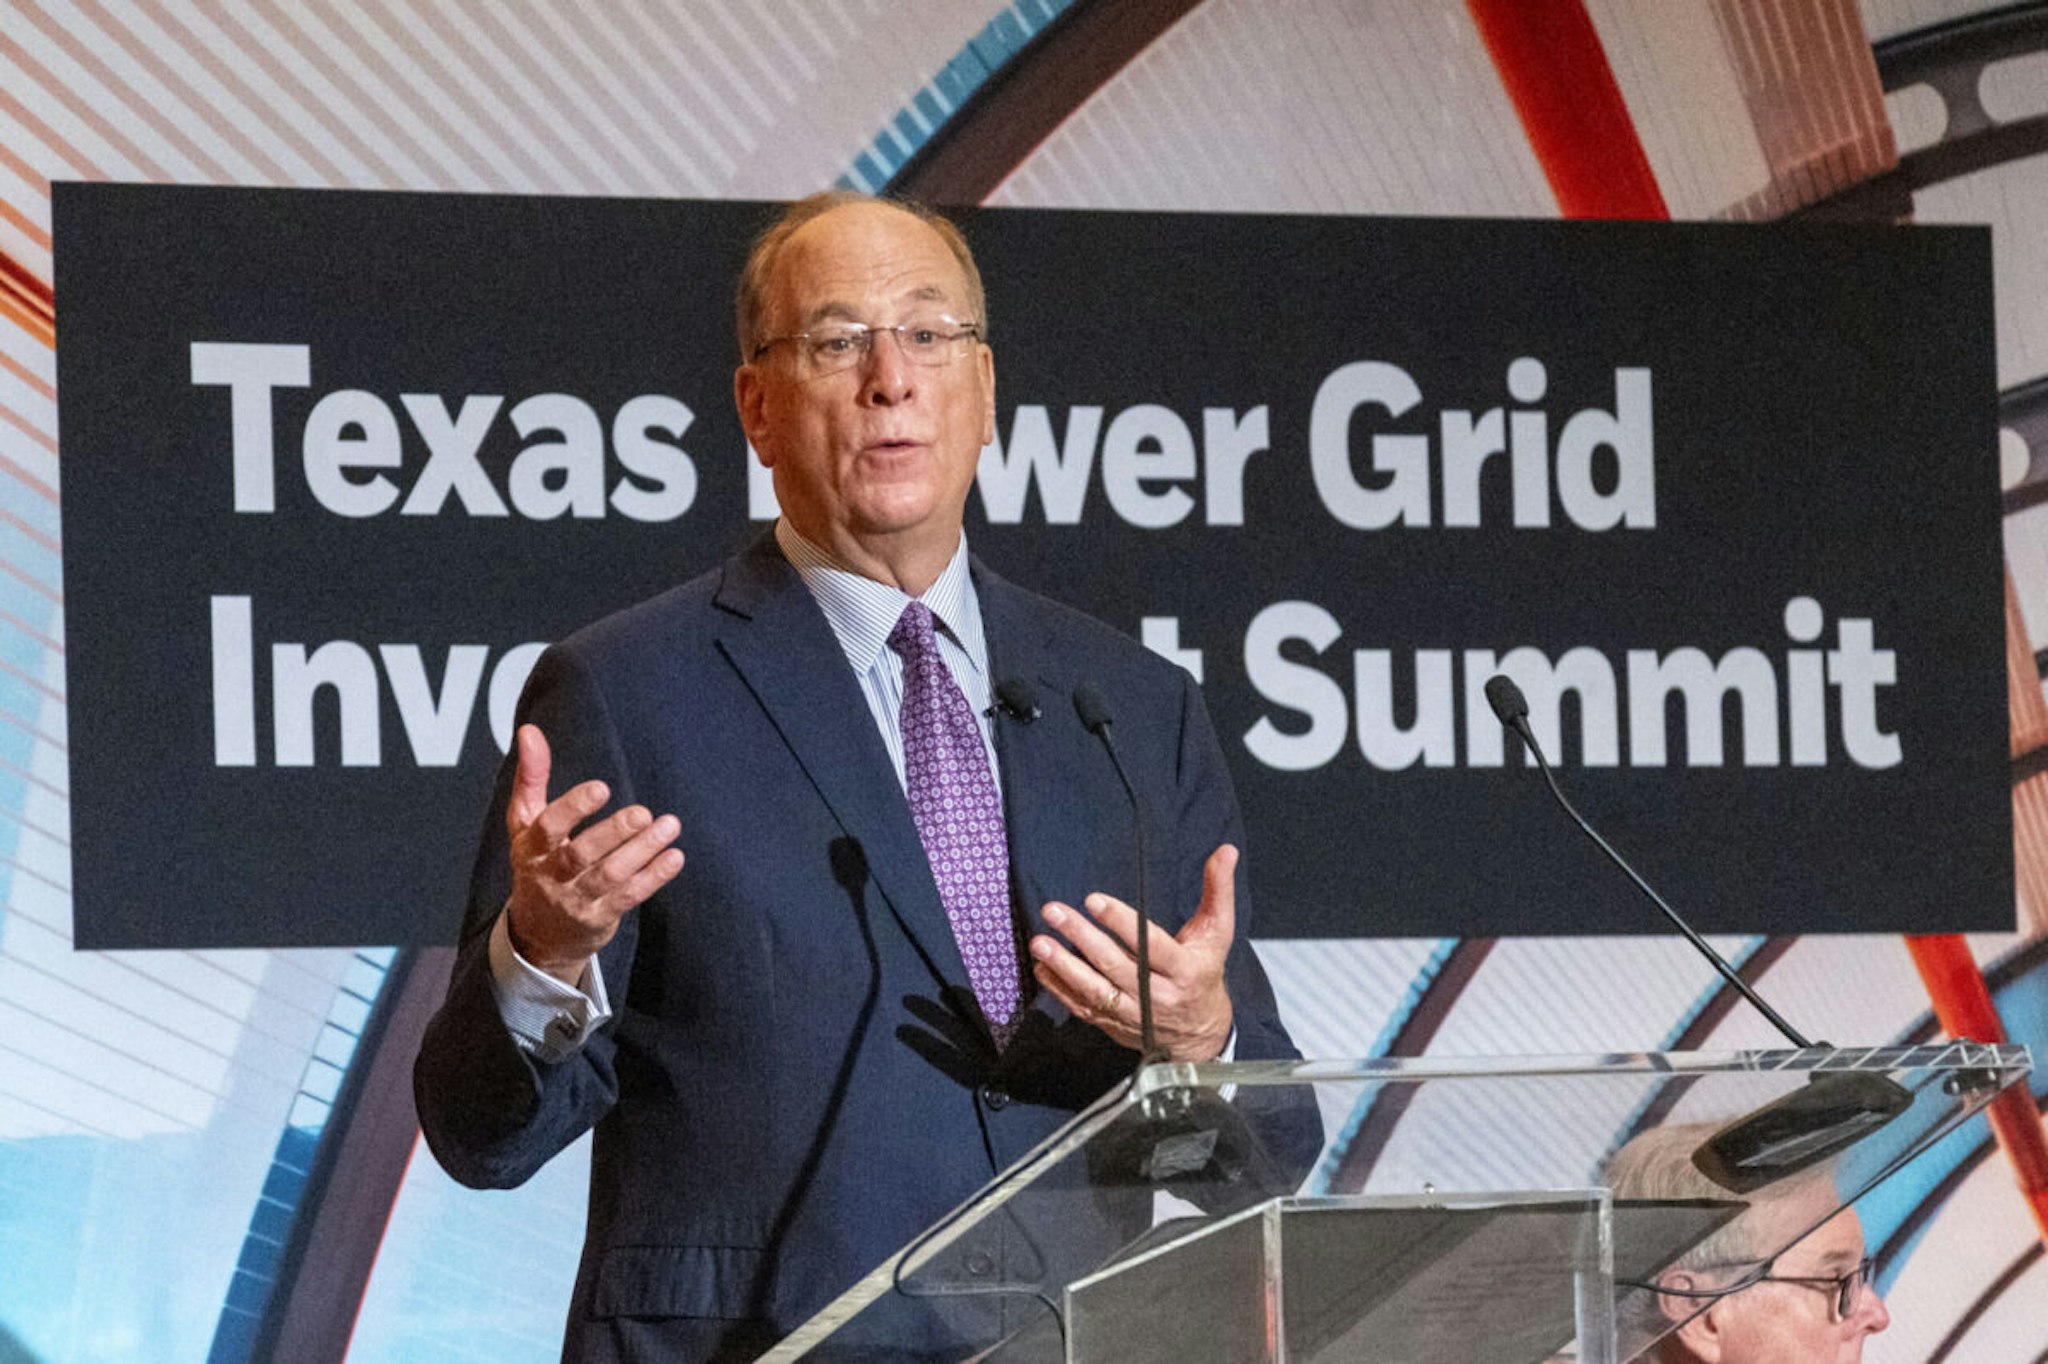 Lieutenant Governor Dan Patrick, right, listens as Larry Fink, Chairman and Chief Executive Officer of BlackRock, makes a statement during opening remarks of the Texas Power Grid Investment Summit, Tuesday, Feb. 6, 2024 in Houston.